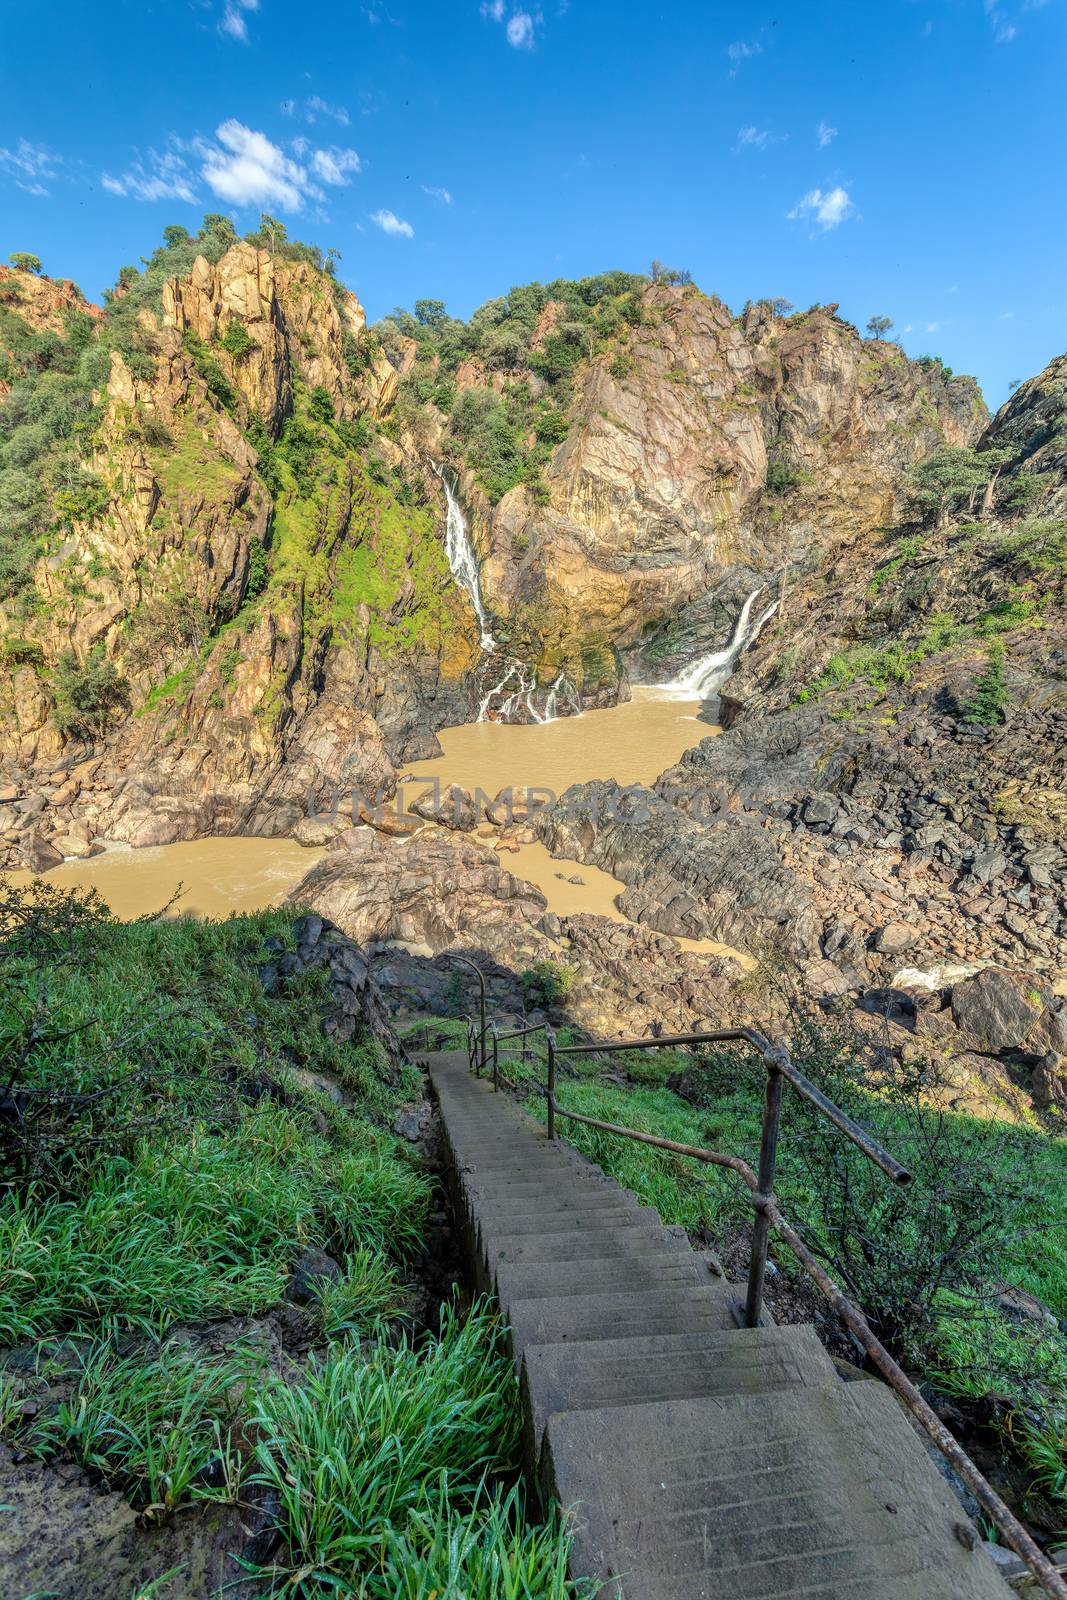 stairs down to Ruacana Falls on the Kunene River in Northern Namibia and Southern Angola border, Africa wilderness landscape